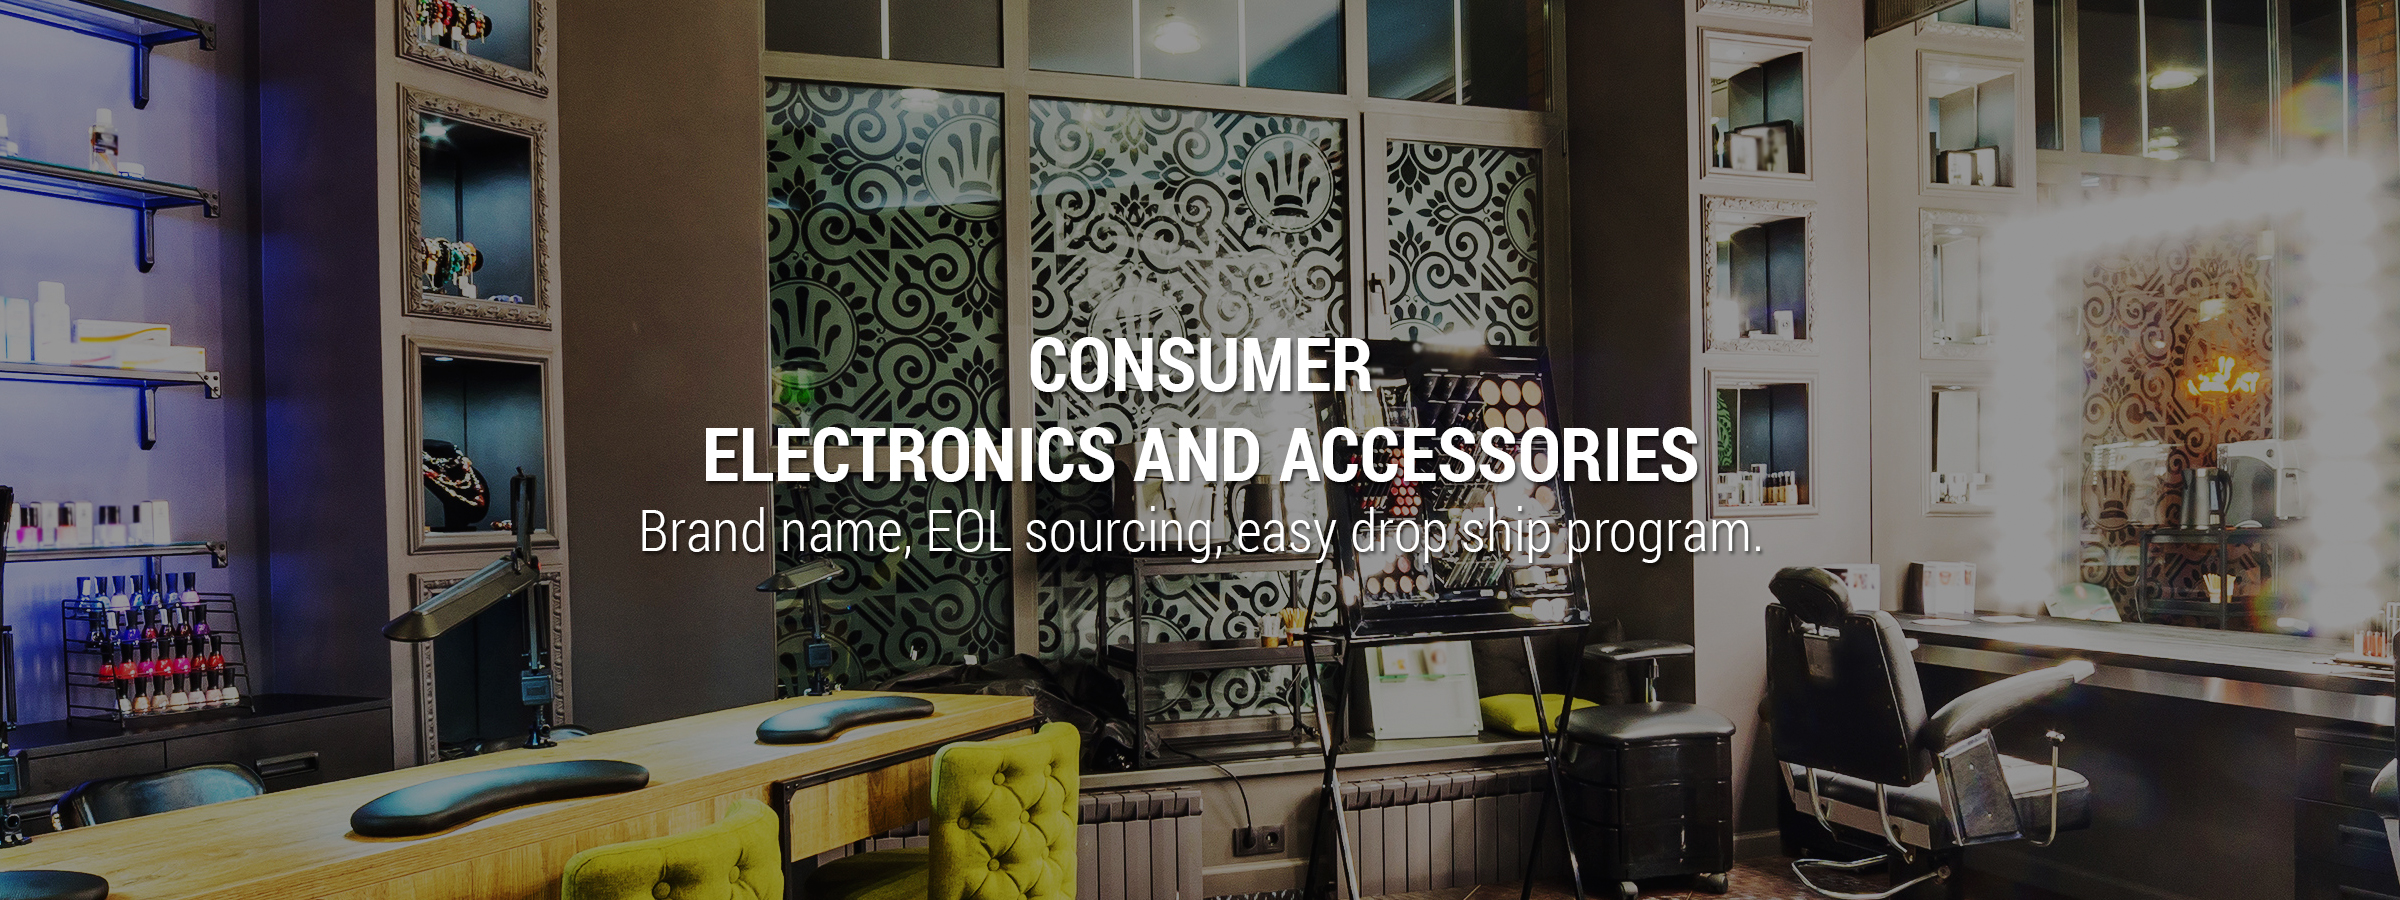 Consumer Electronics and Accessories